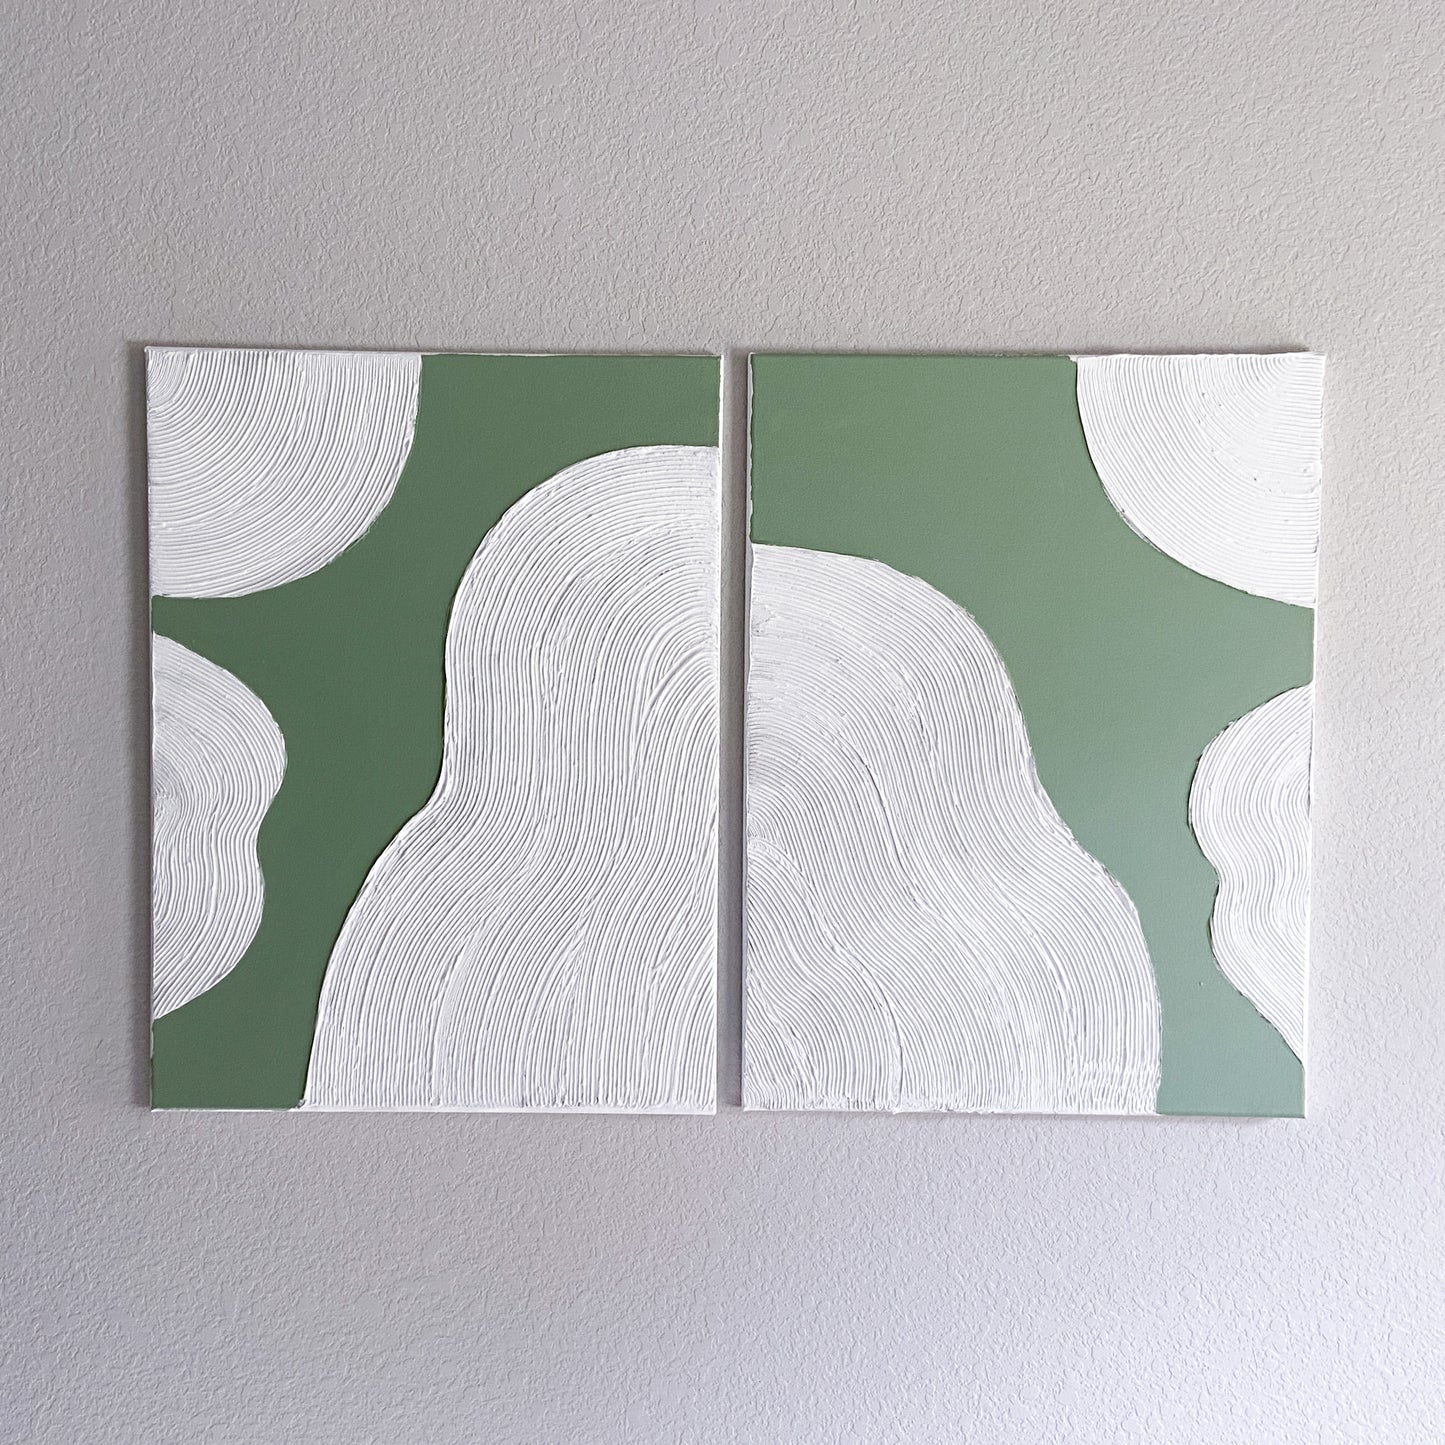 Green and White Textured art canvas